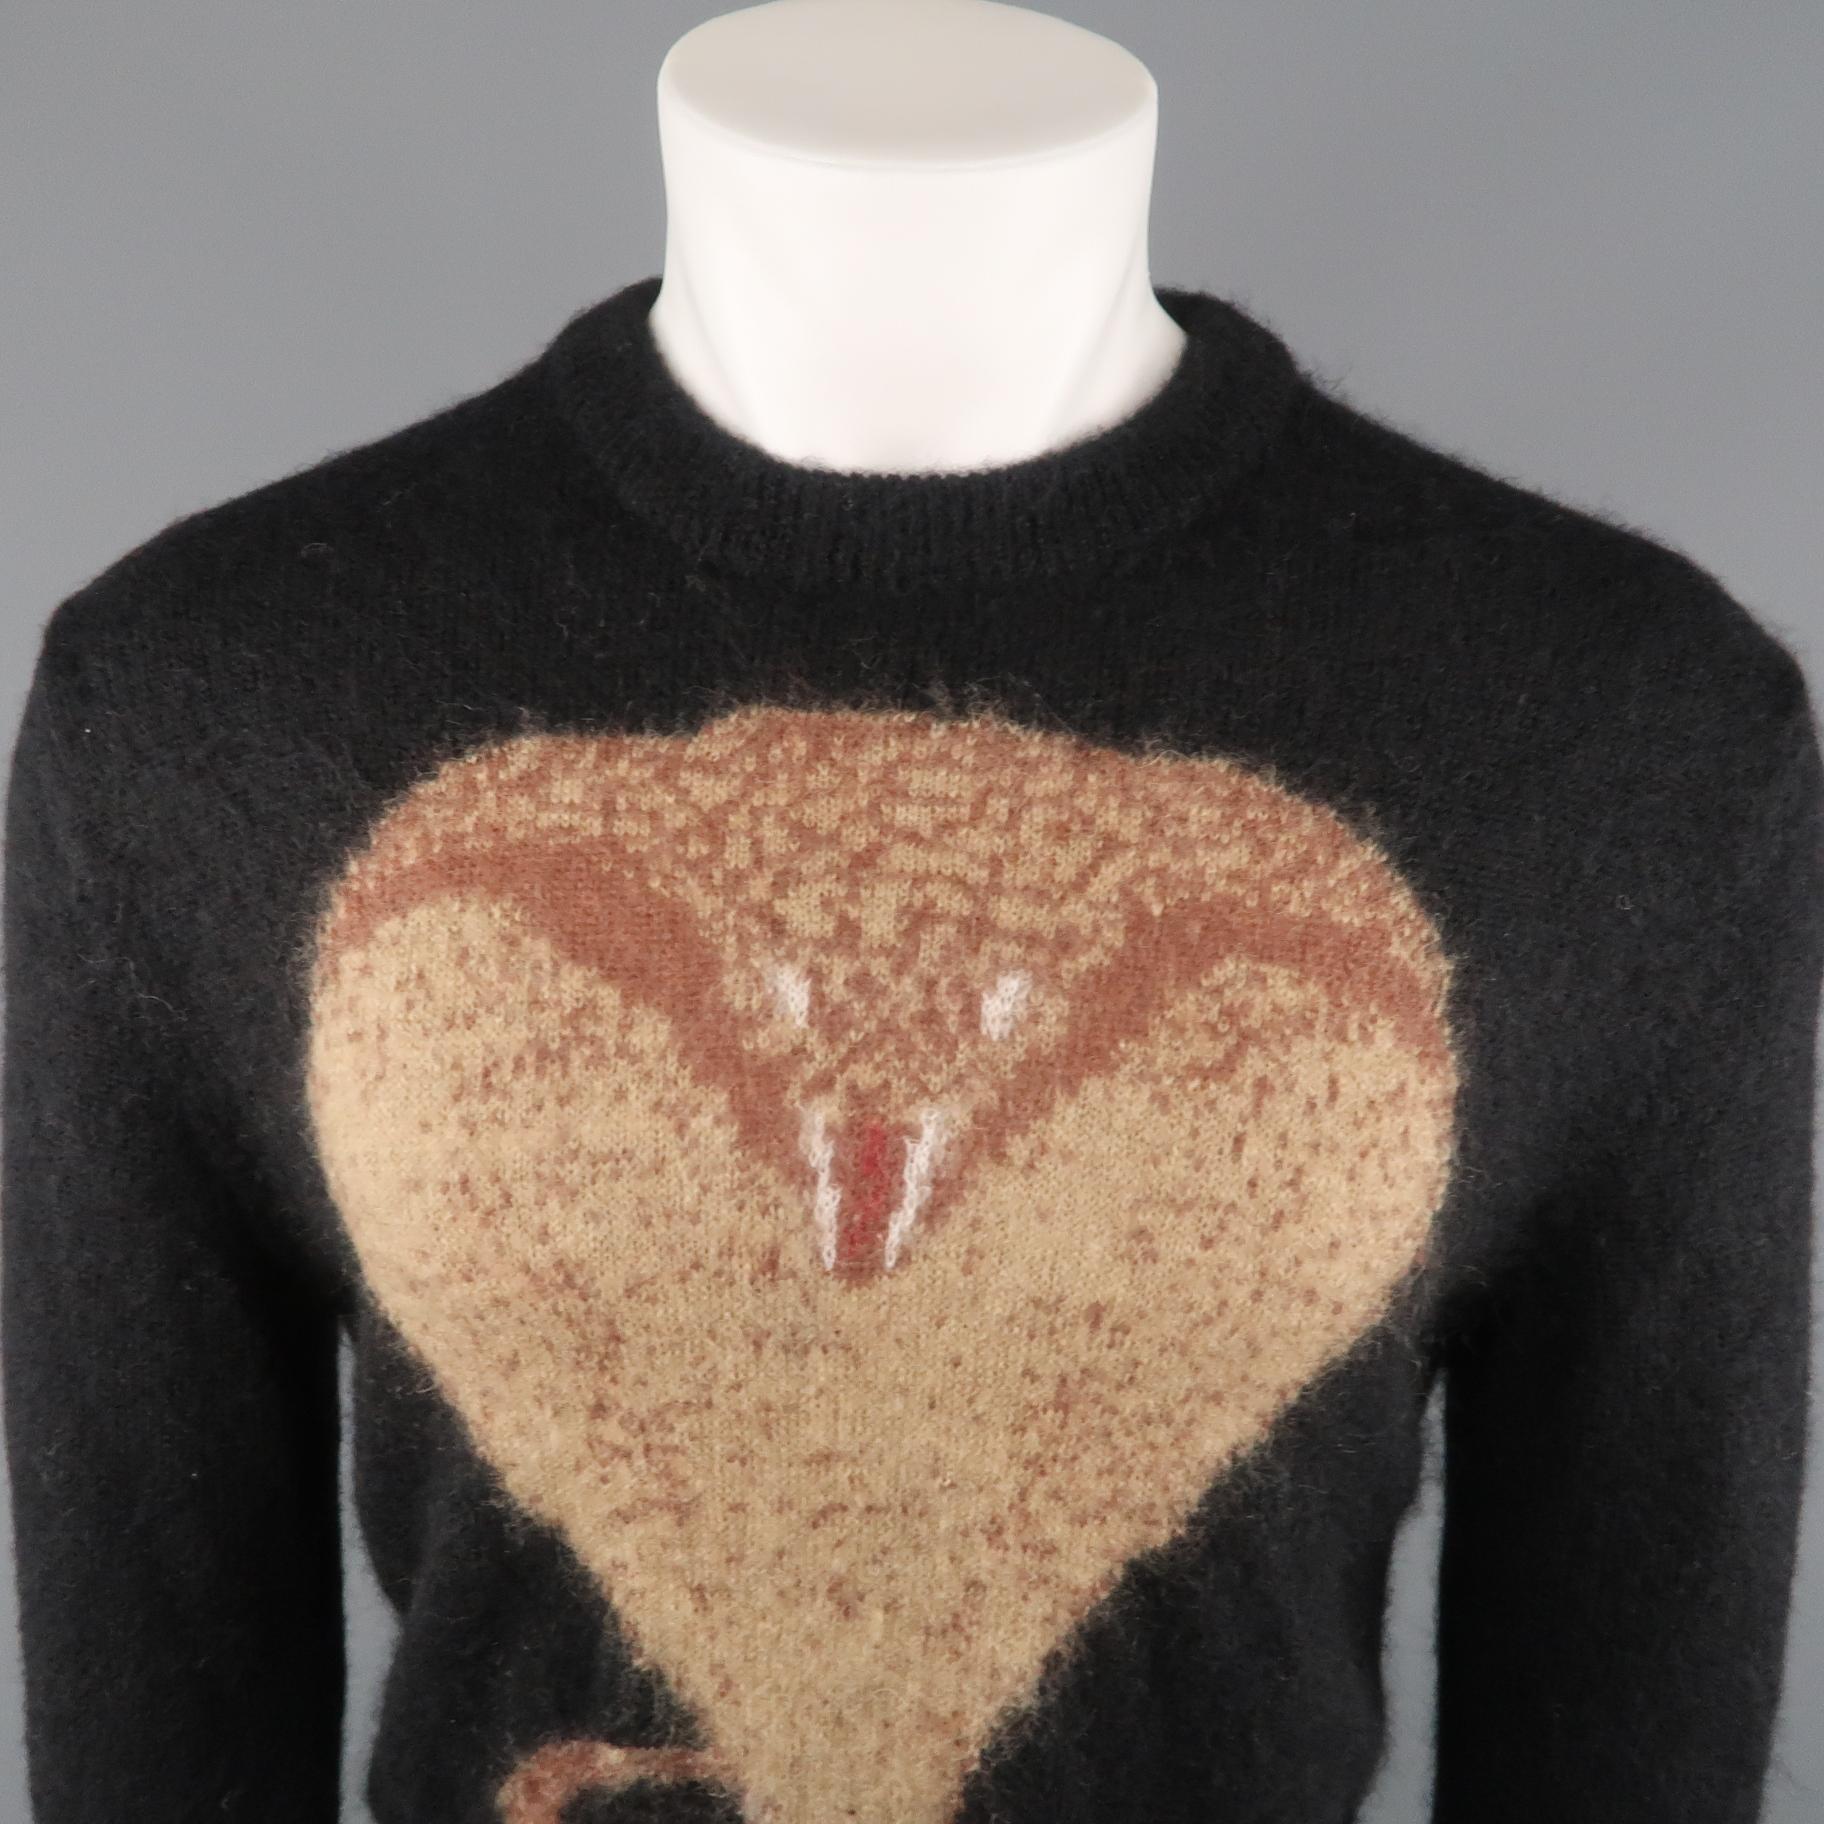 GIVENCHY sweater comes in a black mohair blend featuring a front oversized cobra print and a ribbed collar. Fall 2016. Made in Italy.
 
Excellent Pre-Owned Condition.
Marked: S
 
Measurements:
 
Shoulder: 20 in.
Chest: 44 in.
Sleeve: 29 in.
Length: